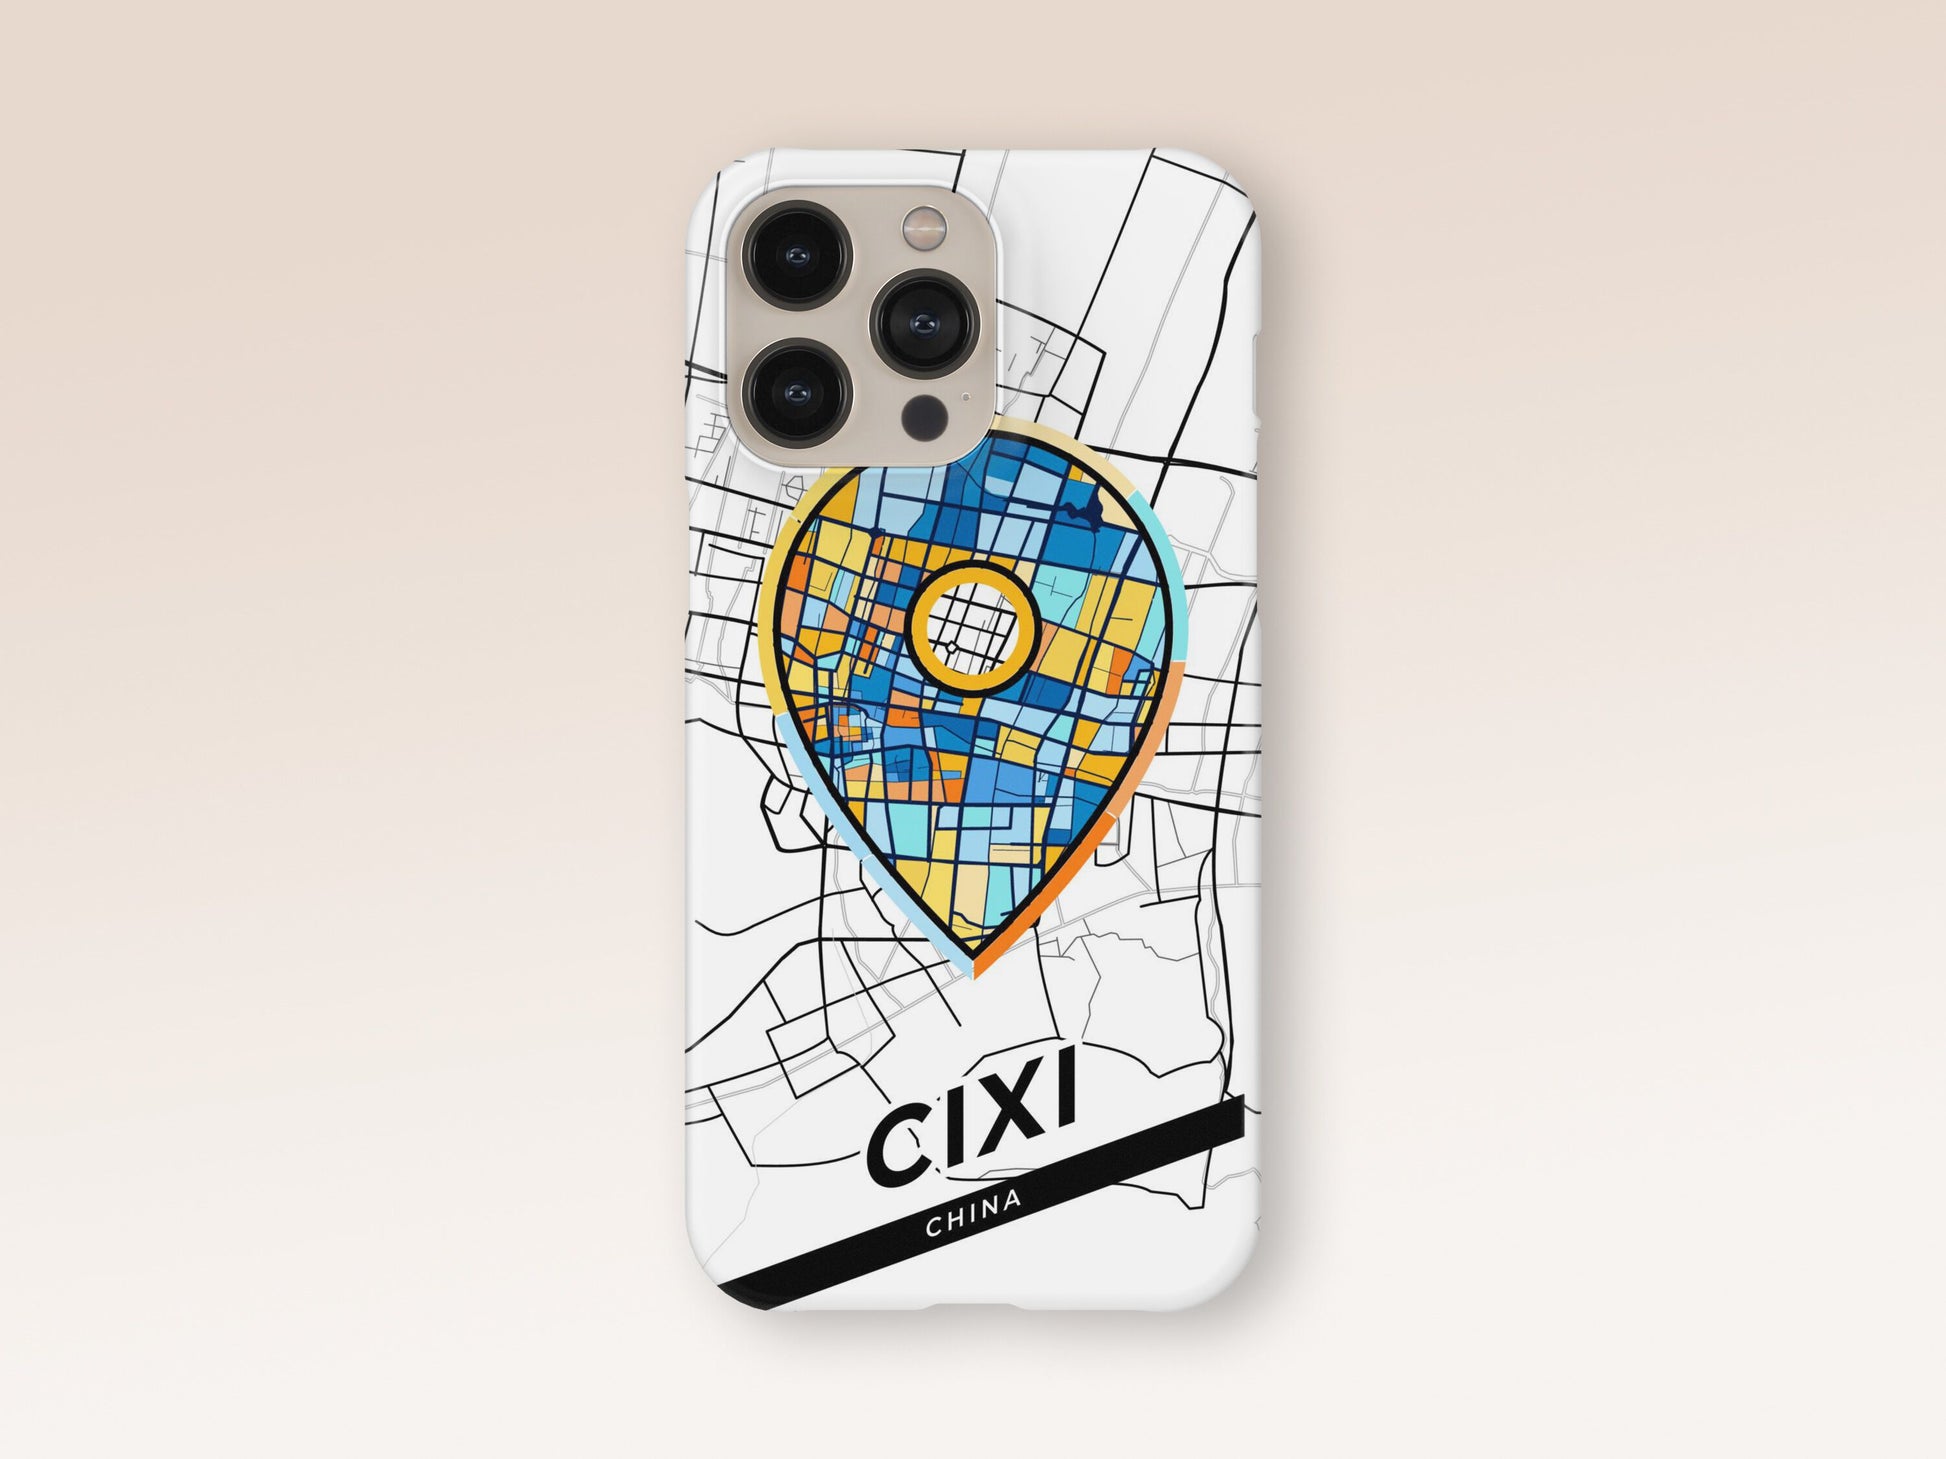 Cixi China slim phone case with colorful icon. Birthday, wedding or housewarming gift. Couple match cases. 1